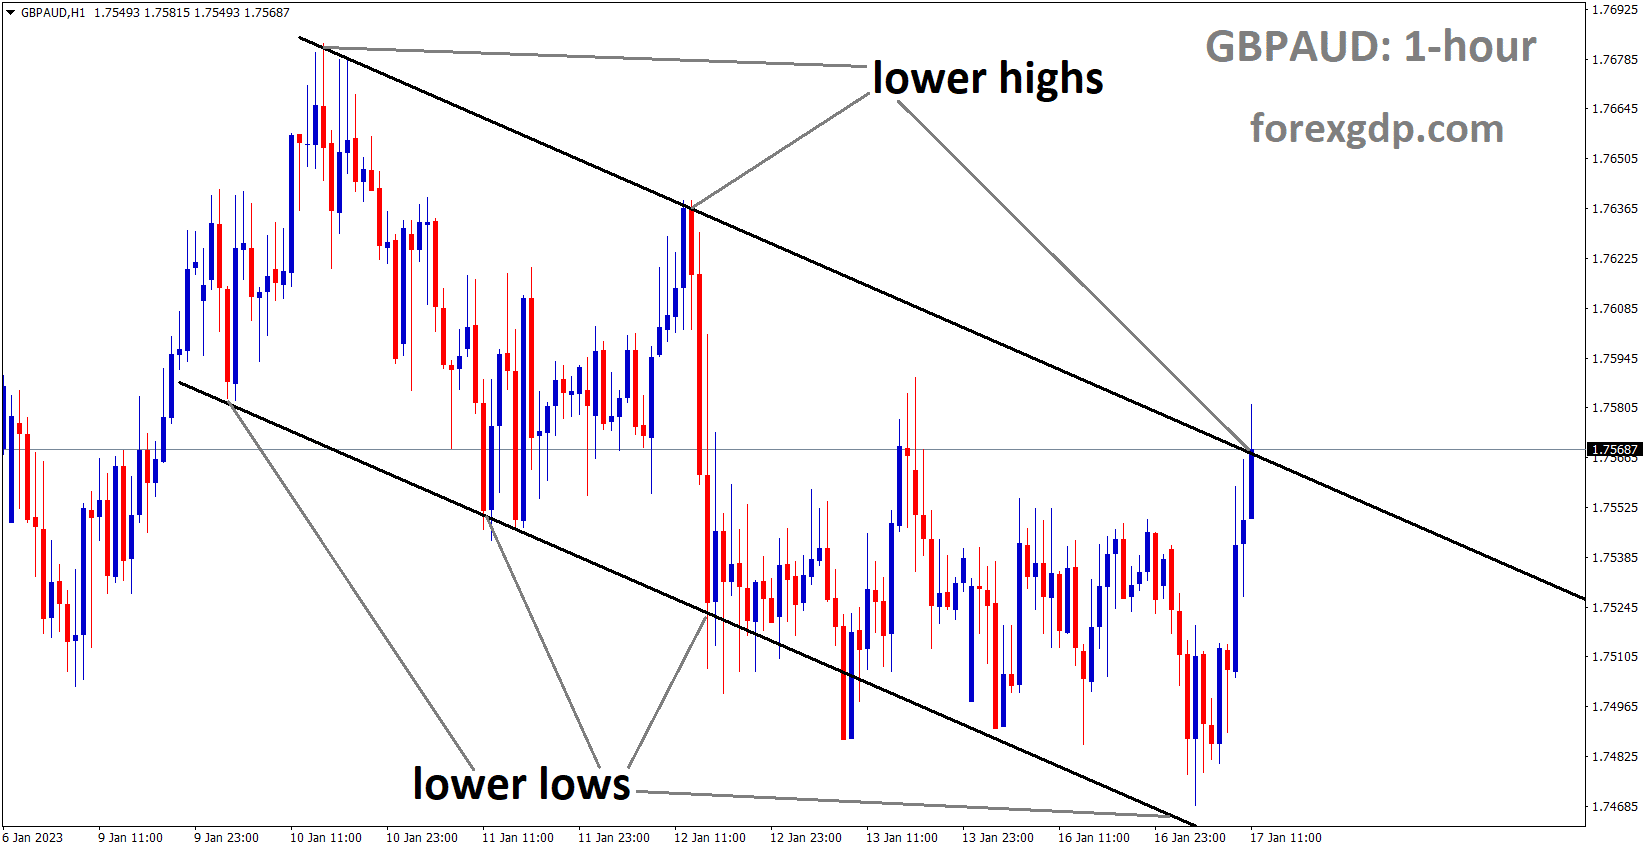 GBPAUD is moving in the Descending channel and the market has reached the lower high area of the channel